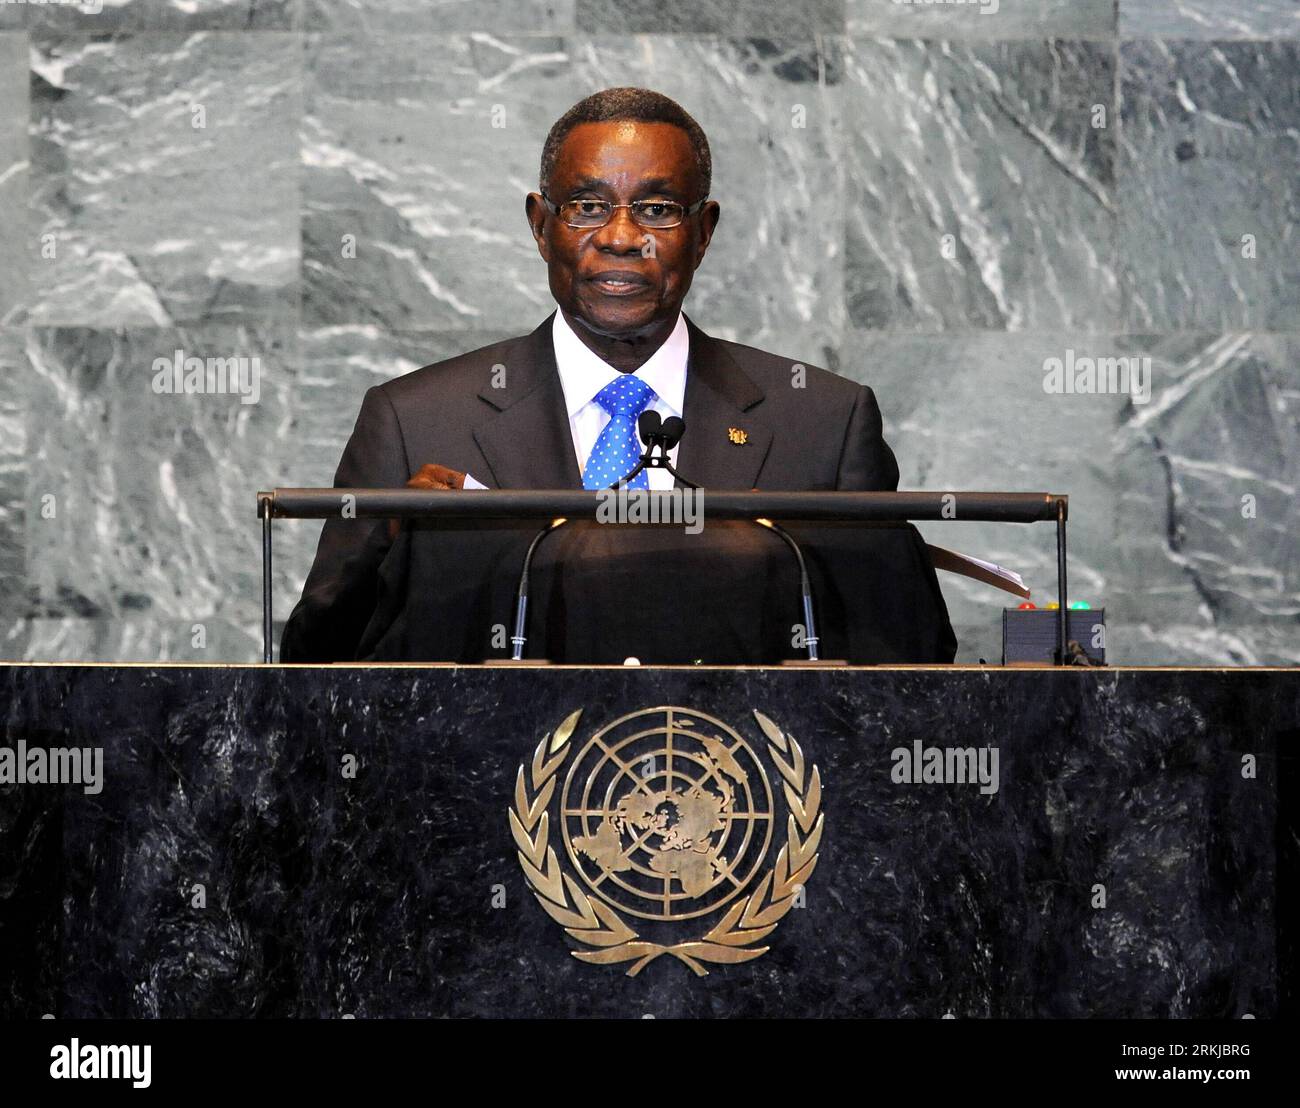 Bildnummer: 56086872  Datum: 23.09.2011  Copyright: imago/Xinhua (110924) -- NEW YORK, Sept. 24, 2011 (Xinhua) -- President of Ghana John Evans Atta Mills addresses the general debate of the 66th session of the UN General Assembly at UN headquarters in New York Sept. 23, 2011. (Xinhua/Shen Hong)(ctt) US-UN-GENERAL ASSEMBLY PUBLICATIONxNOTxINxCHN People Politik UNO xda x0x premiumd 2011 quer      56086872 Date 23 09 2011 Copyright Imago XINHUA  New York Sept 24 2011 XINHUA President of Ghana John Evans Atta Mills addresses The General Debate of The  Session of The UN General Assembly AT UN Head Stock Photo